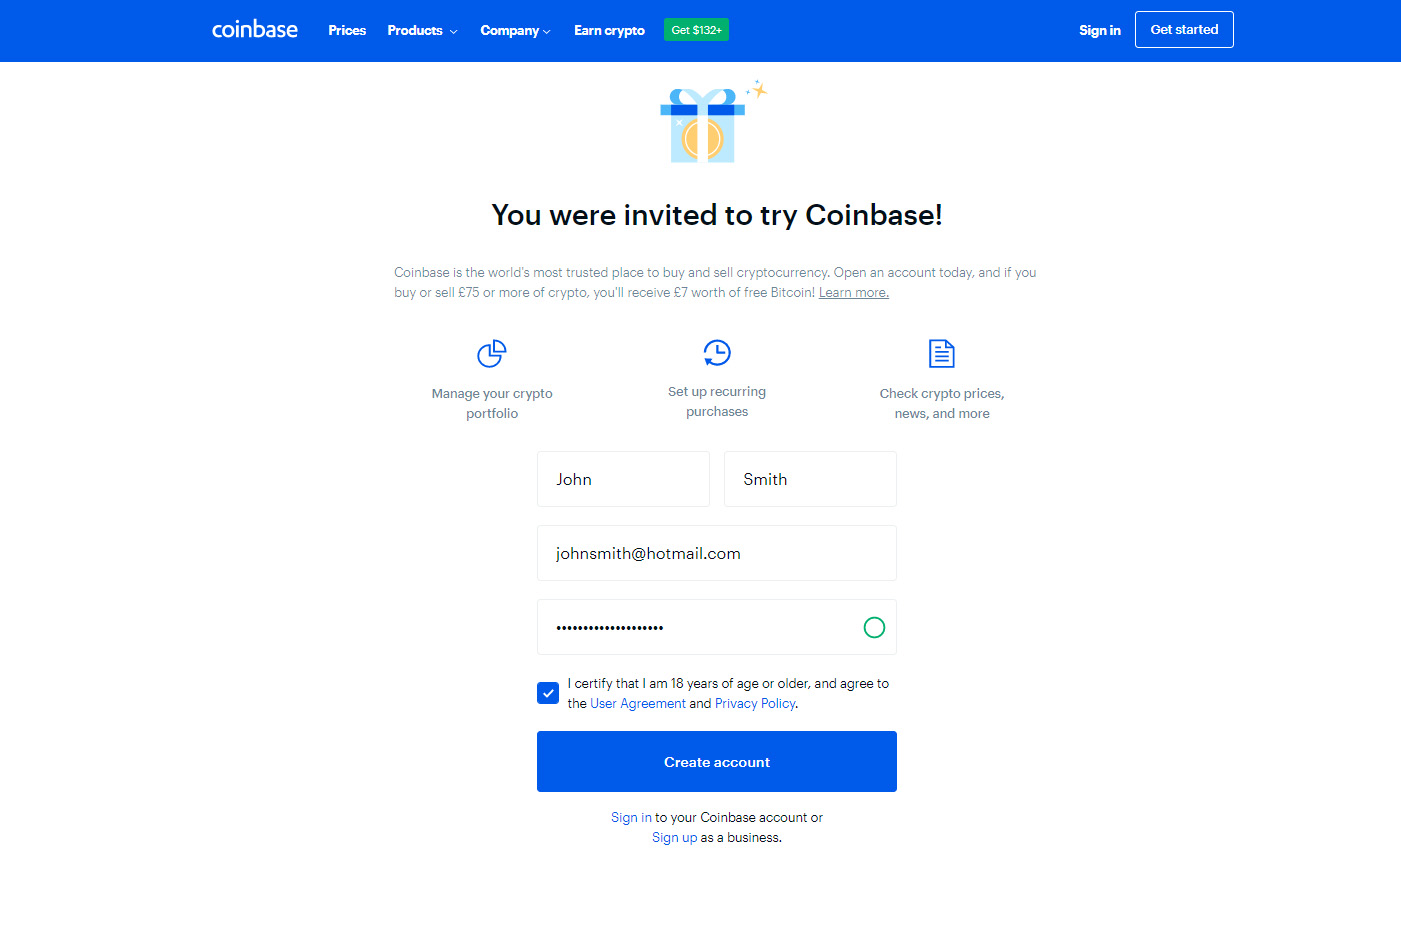 how to open a coinbase account under 18